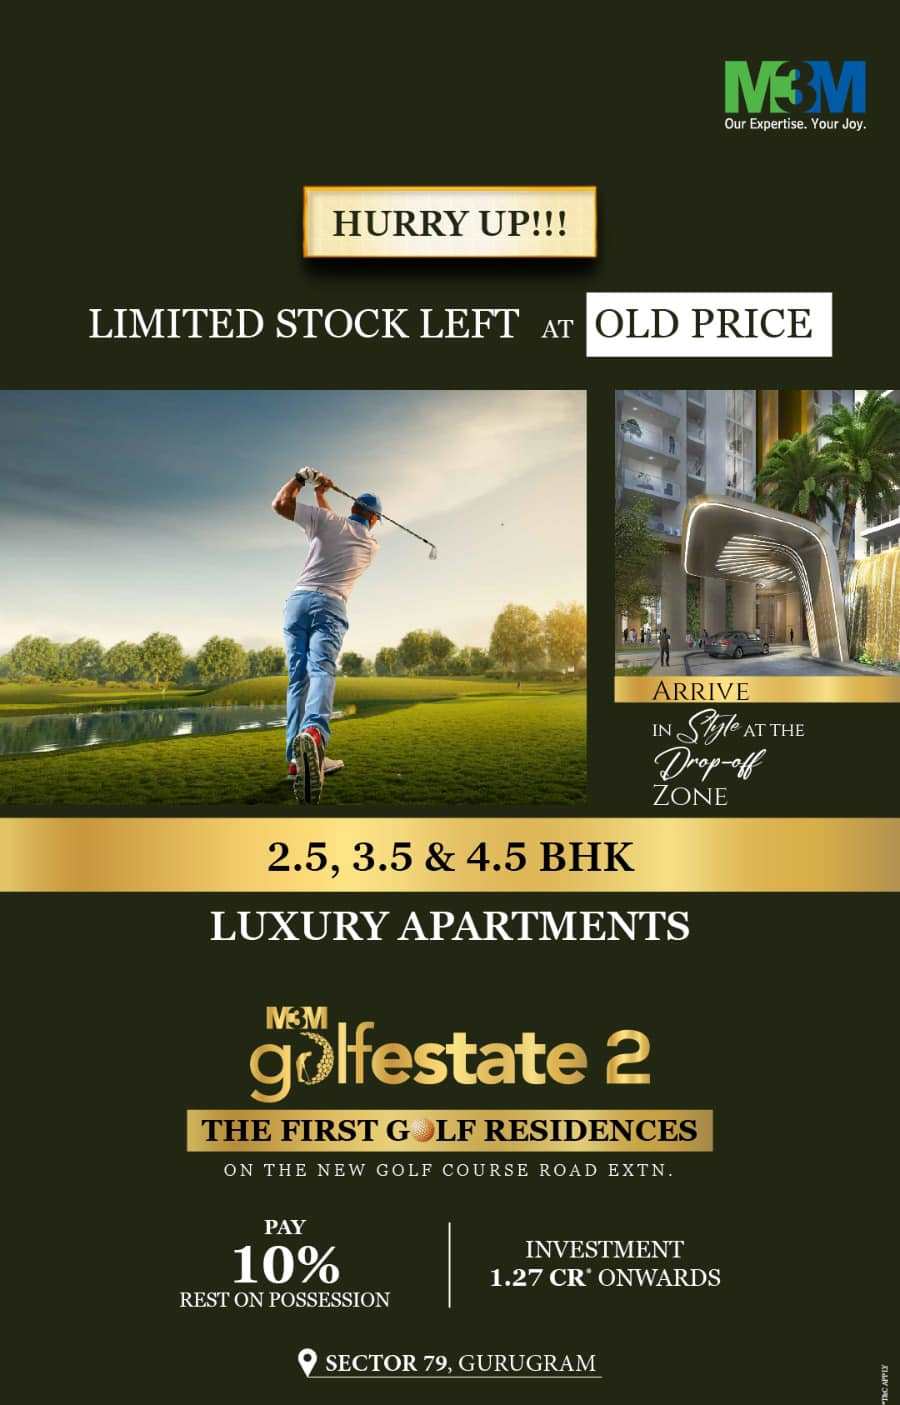 Limited stock left at old price at M3M Golf Estate Phase 2, Gurgaon